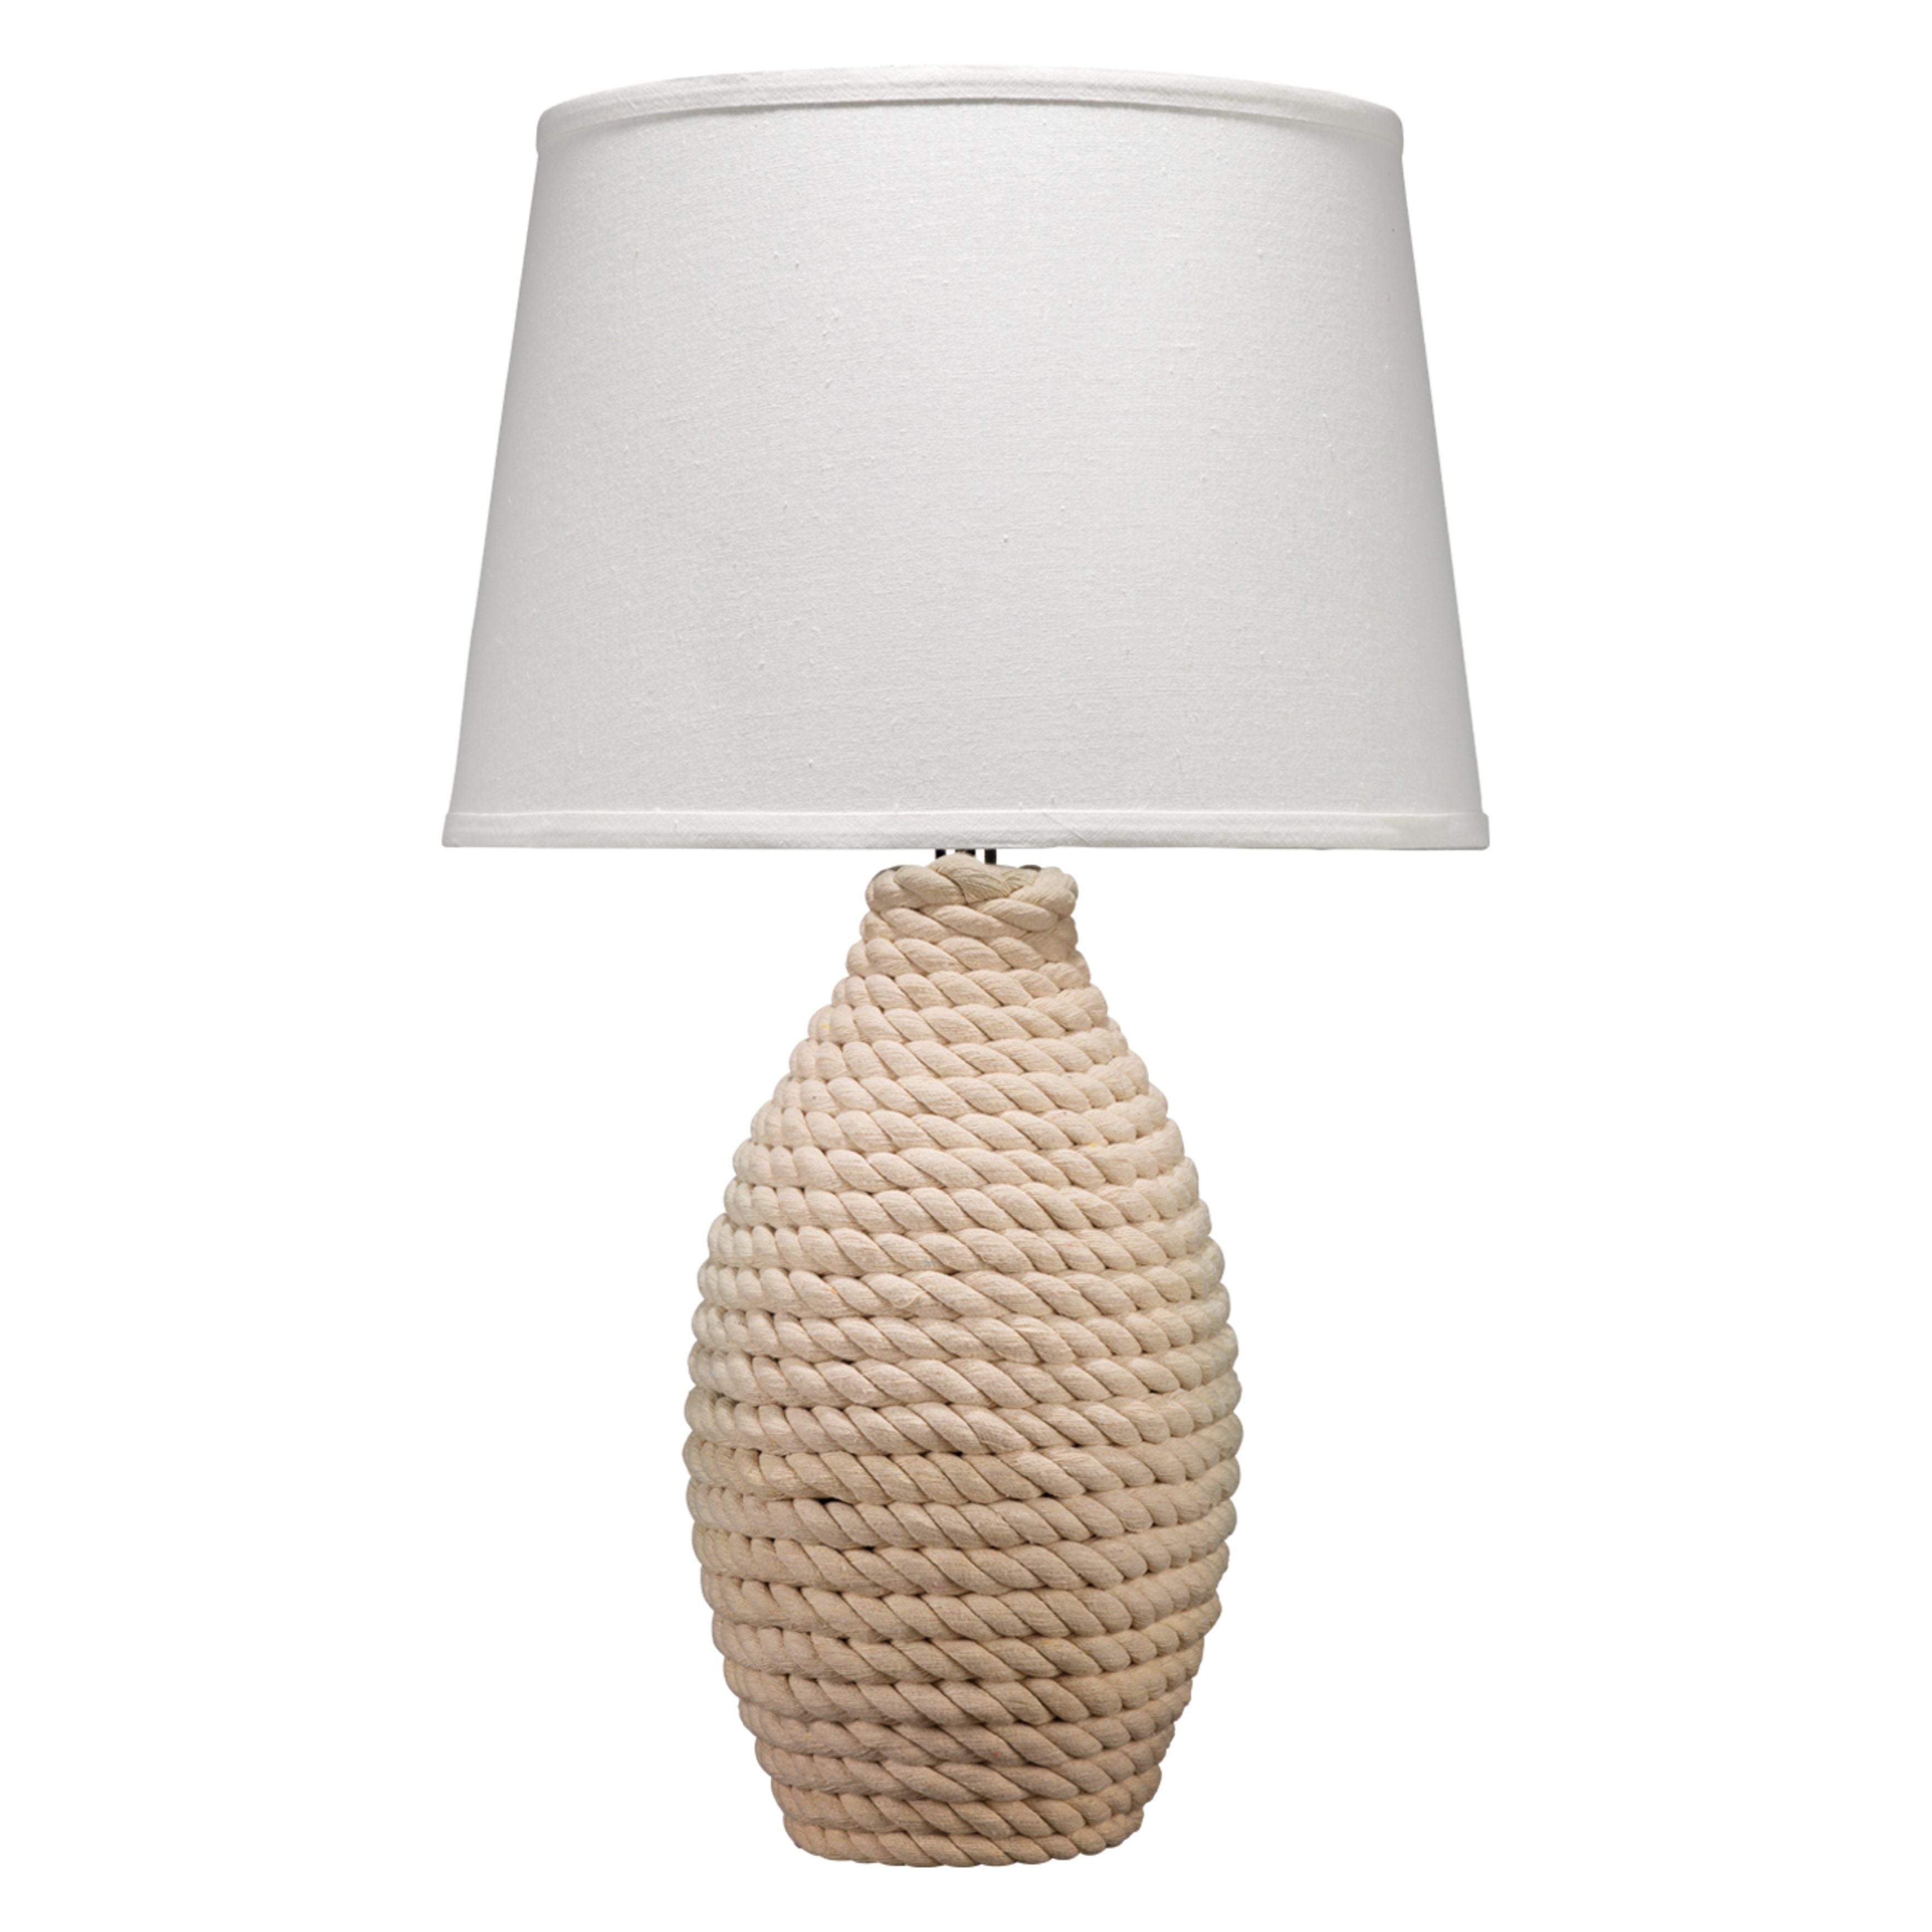 Jamie Young Company - BL616-TL39 - Rope Table Lamp - Rope - Off-White